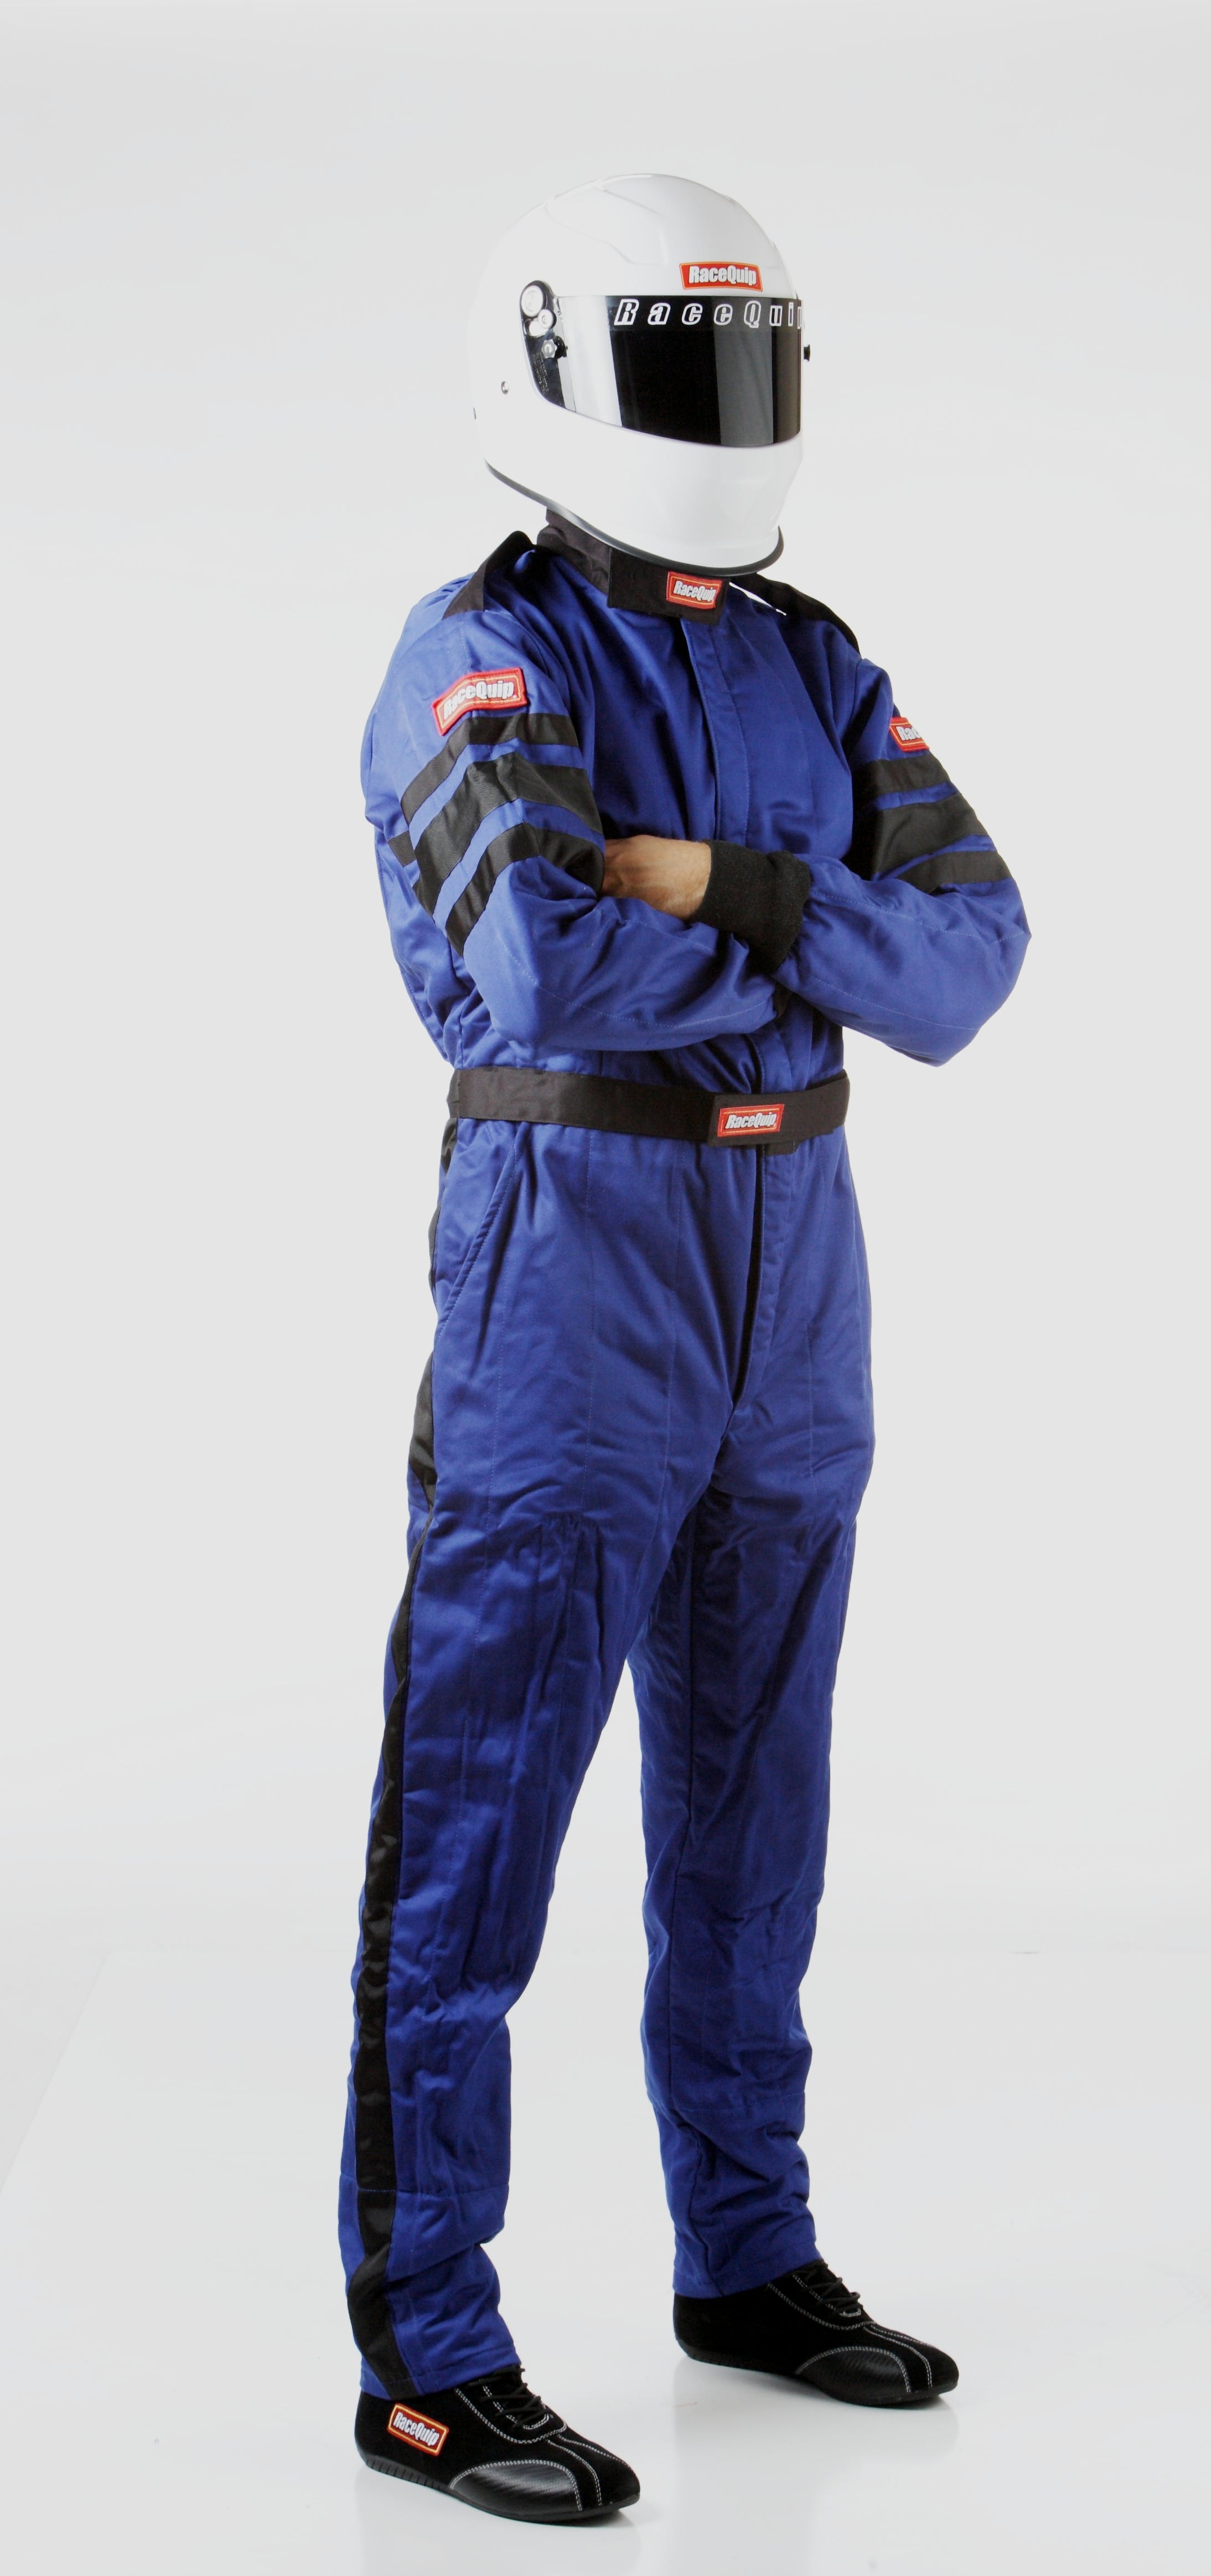 RaceQuip 120027 SFI-5 Pyrovatex One-Piece Multi-Layer Racing Fire Suit (Blue, XX-Large)